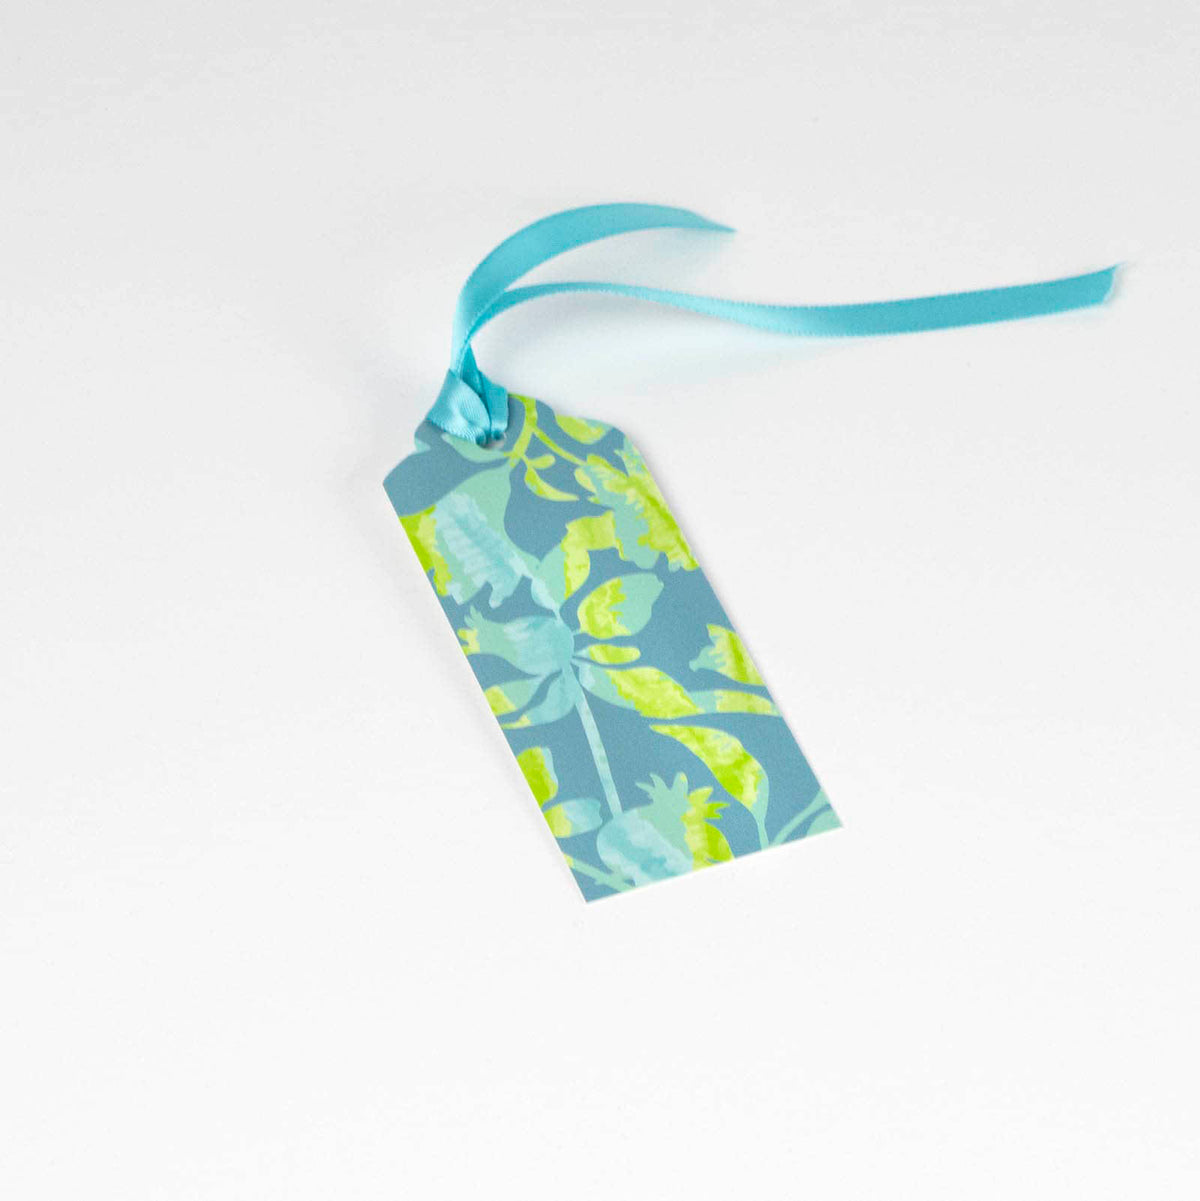 Single gift tag with beautiful patterned floral design in blue and green with matching aqua ribbon attached